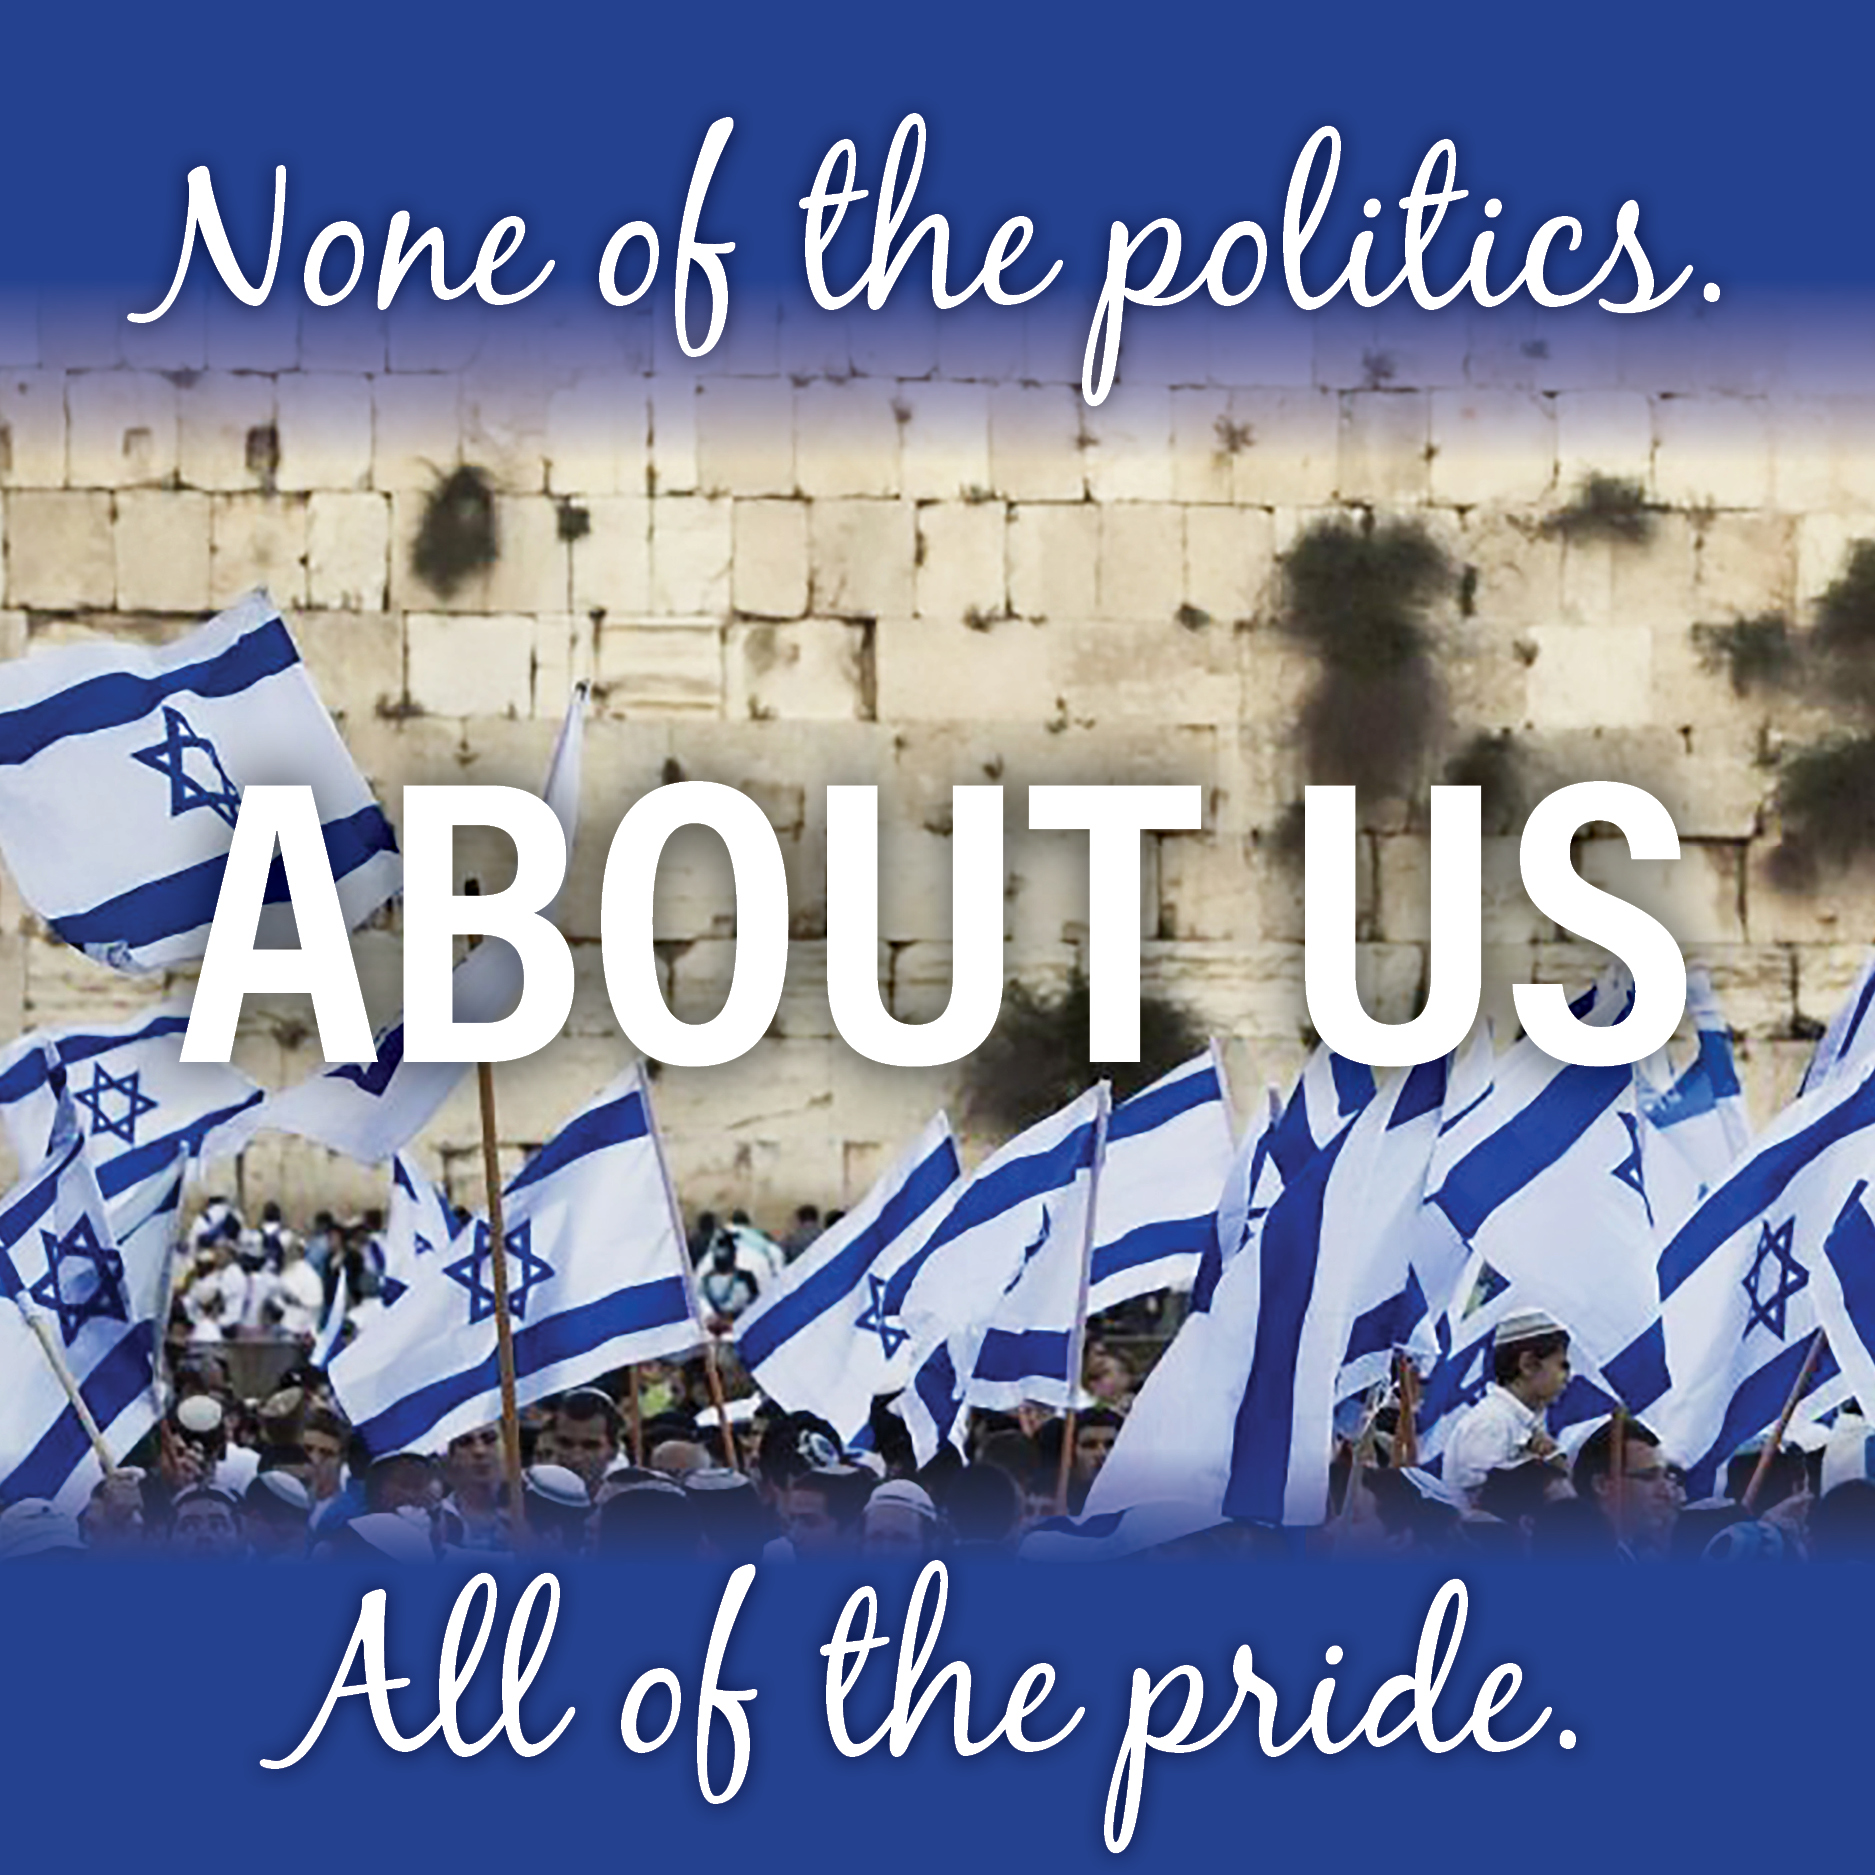 About Israel Forever